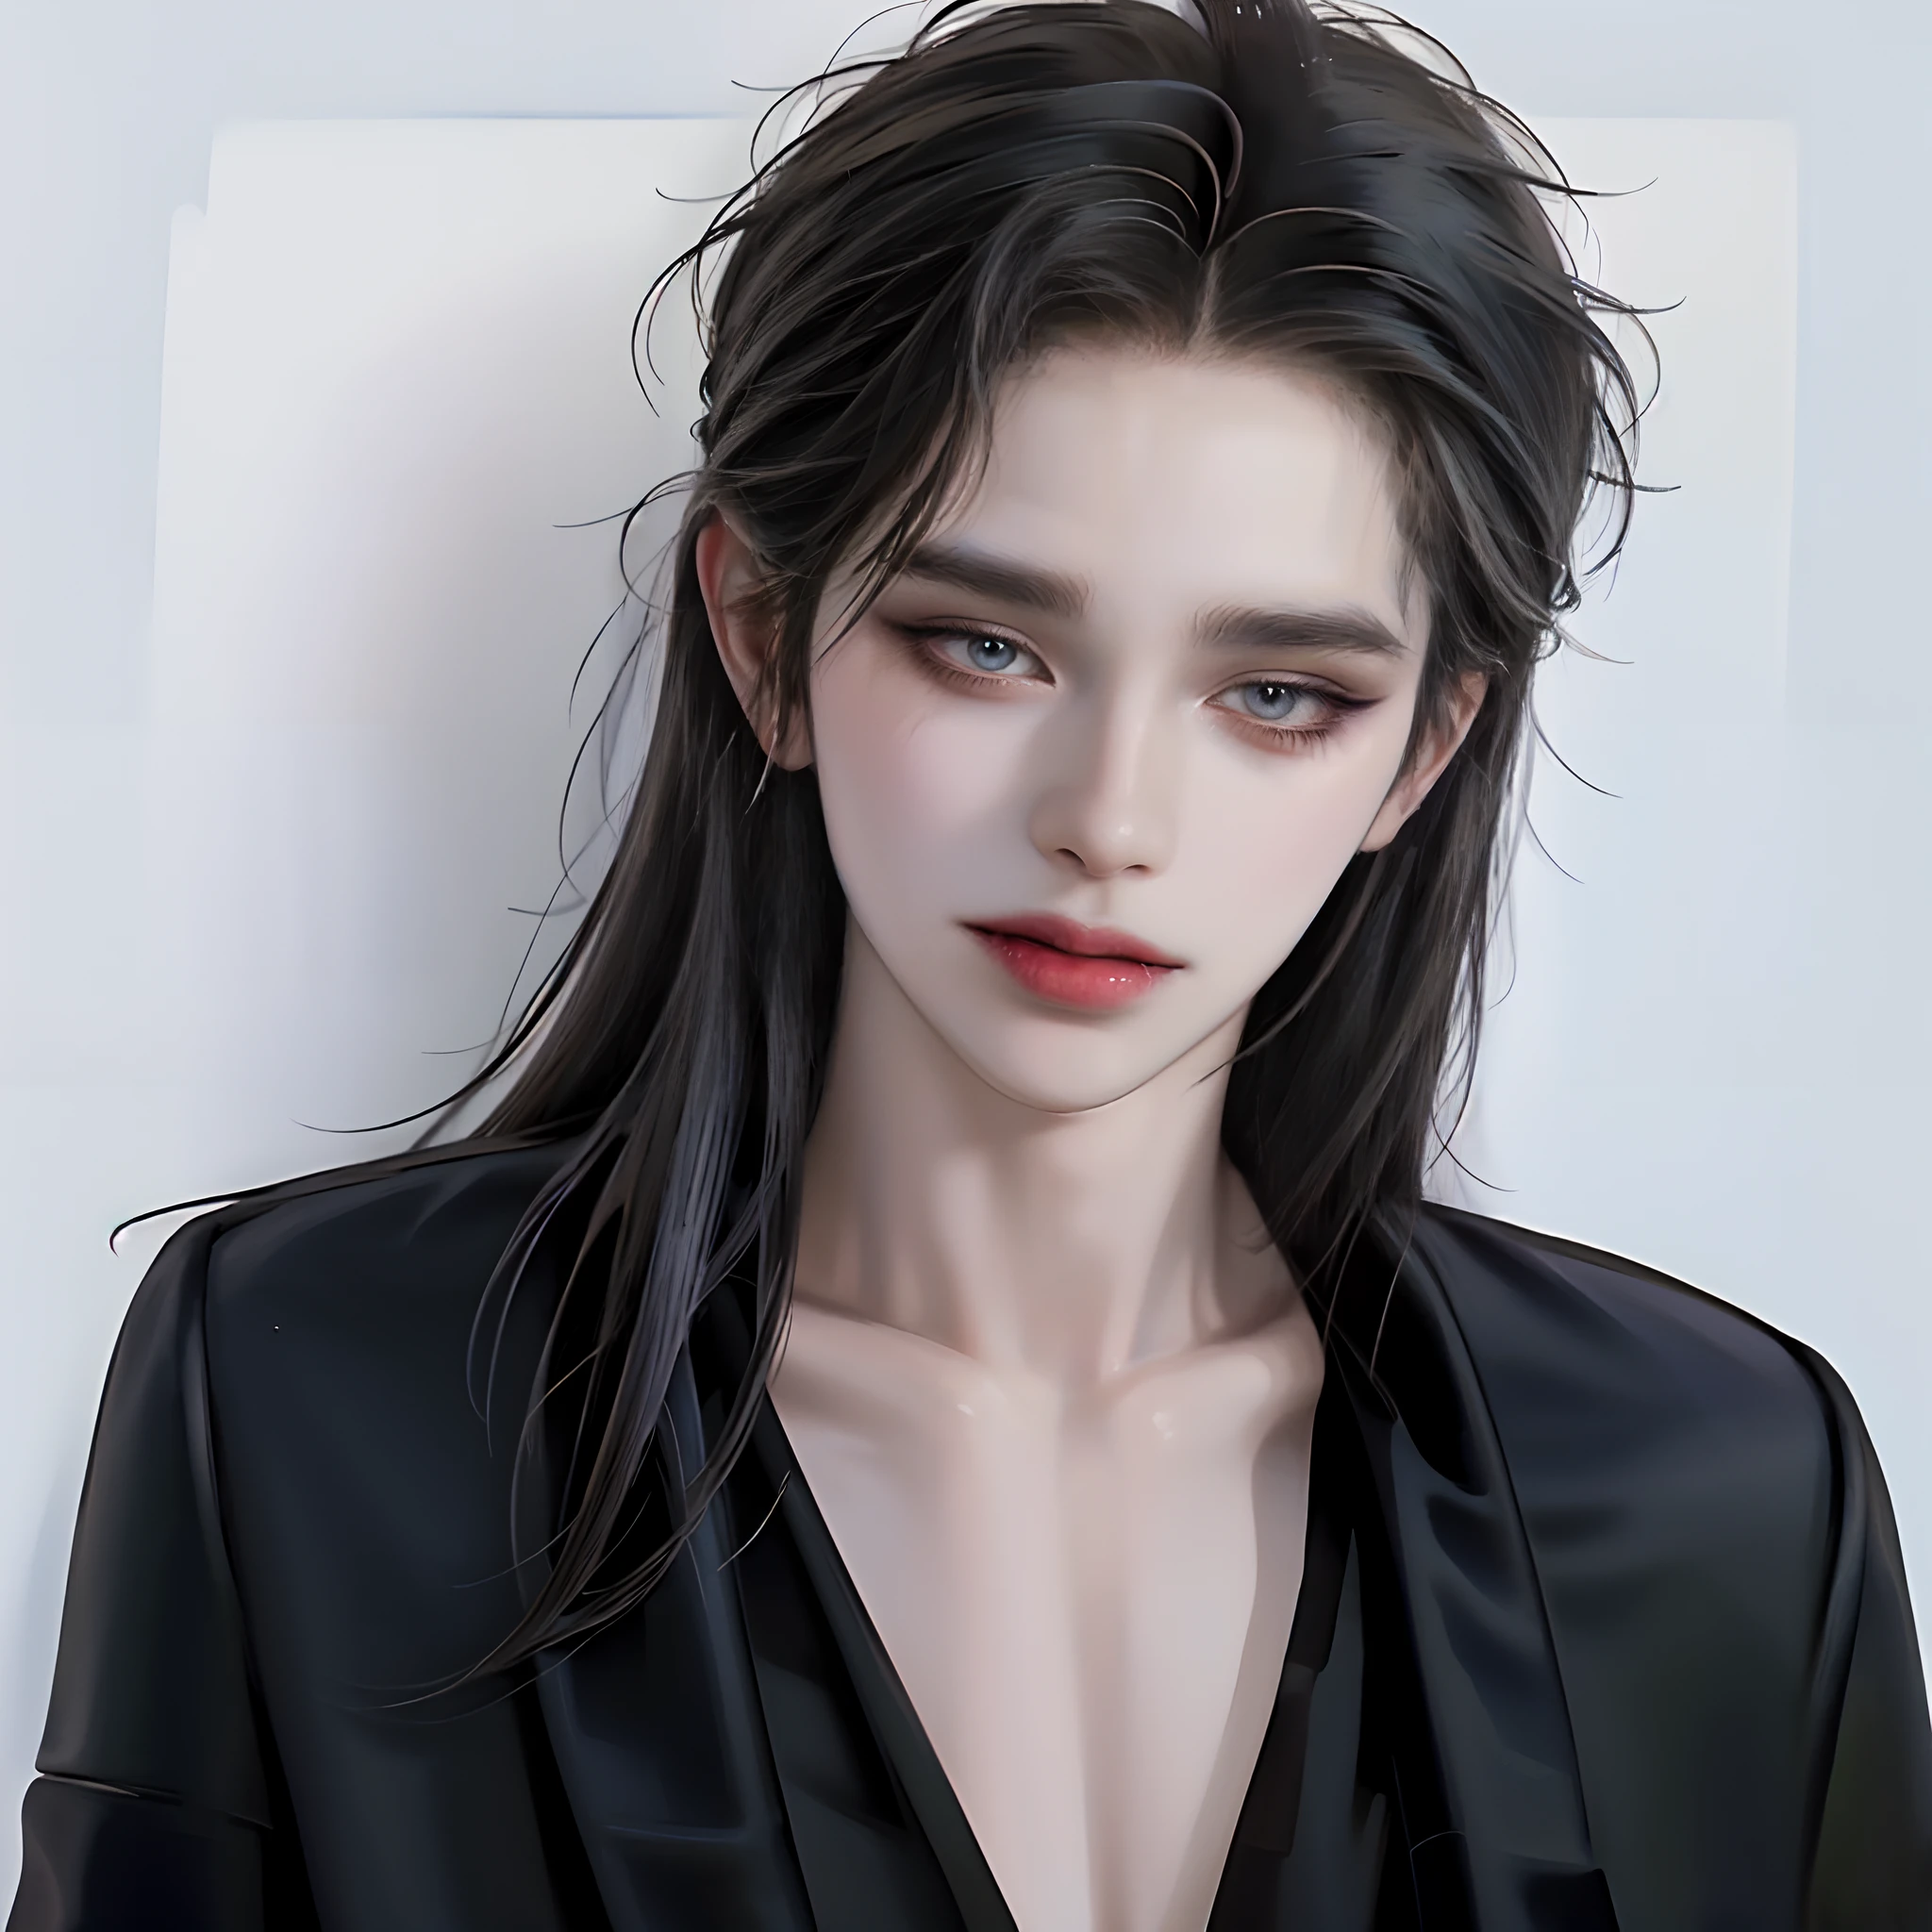 ((4K works))、​masterpiece、（top-quality)、((high-level image quality))、((one beautiful women))、Slim body、((Black Y Shirt Fashion))、(Detailed beautiful eyes)、Crow on black horror background、((Face similar to Chaewon in Ruseraphim))、((shoulder-length hair))、((bright silver hair))、((Smaller face))、((Neutral face))、((Light blue eyes))、((Korean Women))、((18year old))、((Wild Lady))、((A smiling face showing sharp fangs))、((Korean makeup with black eyeshadow))、((elongated and sharp eyes))、((Shot alone))、((vampire))、((Vampire Woman))、Vampire Photos、Villain、((amazing photo))、Horror Pictures、((There is a crow on the right shoulder))、Dark Proof、((Shot diagonally from the side))、((Icon Photo))